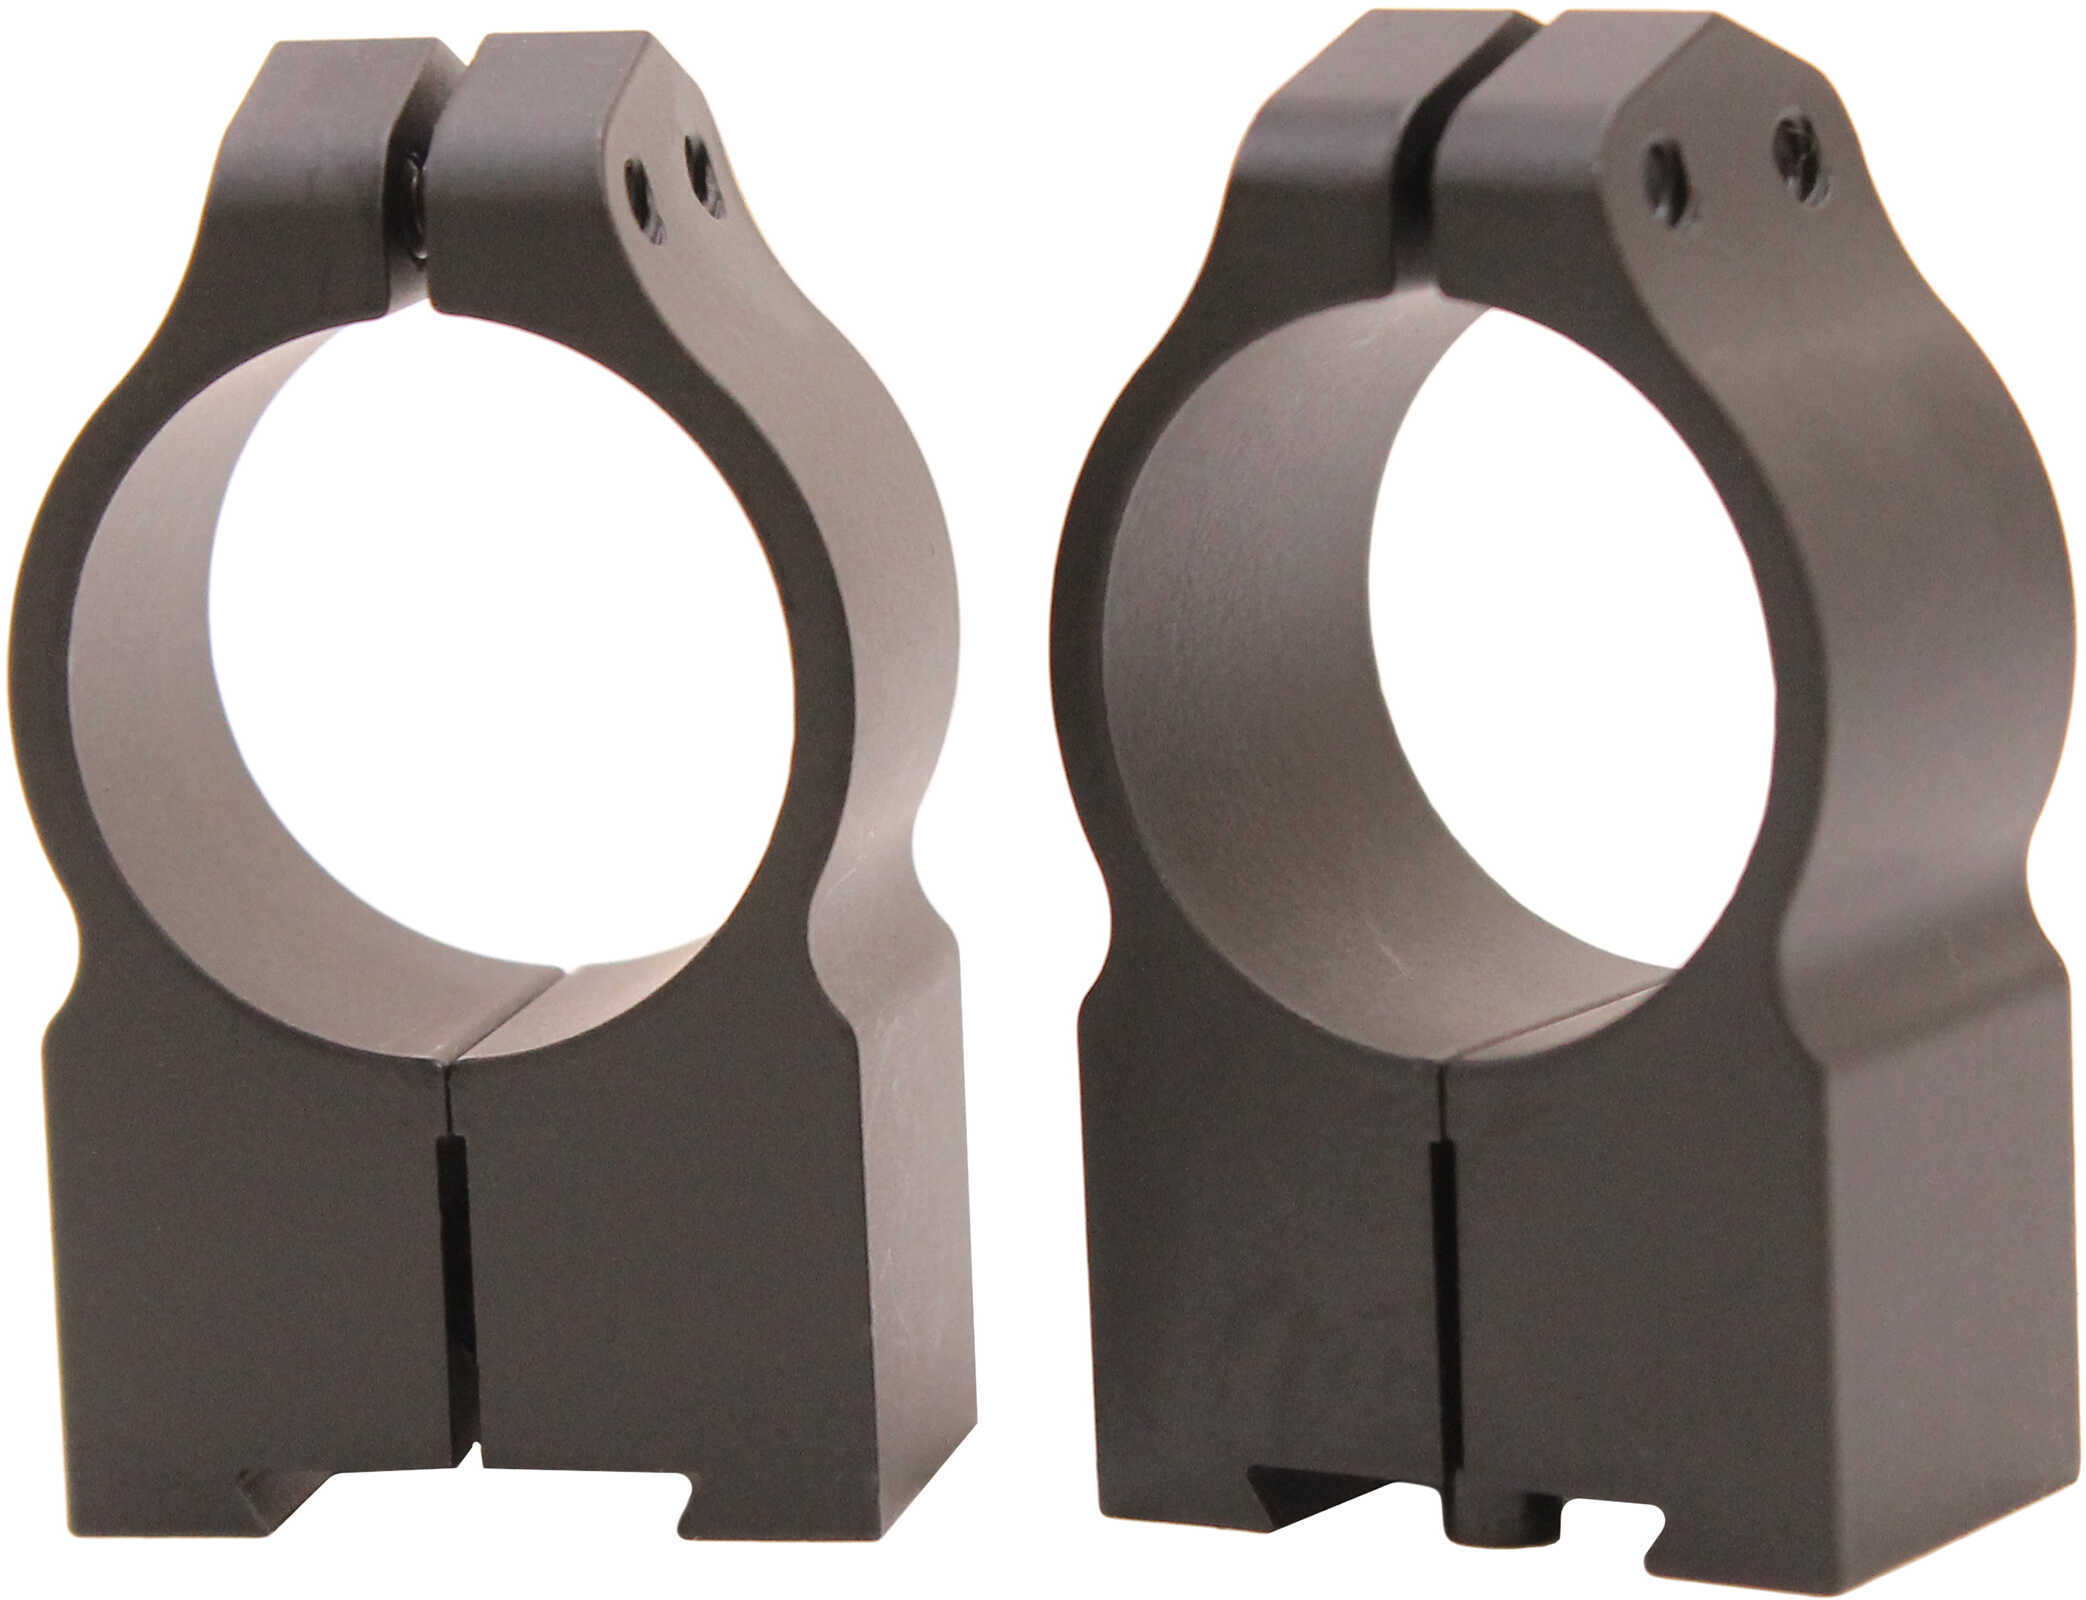 Warne 2-Piece Maxima Fixed Scope Ringmounts With Grooved Receiver - Tikka 1" High Matte